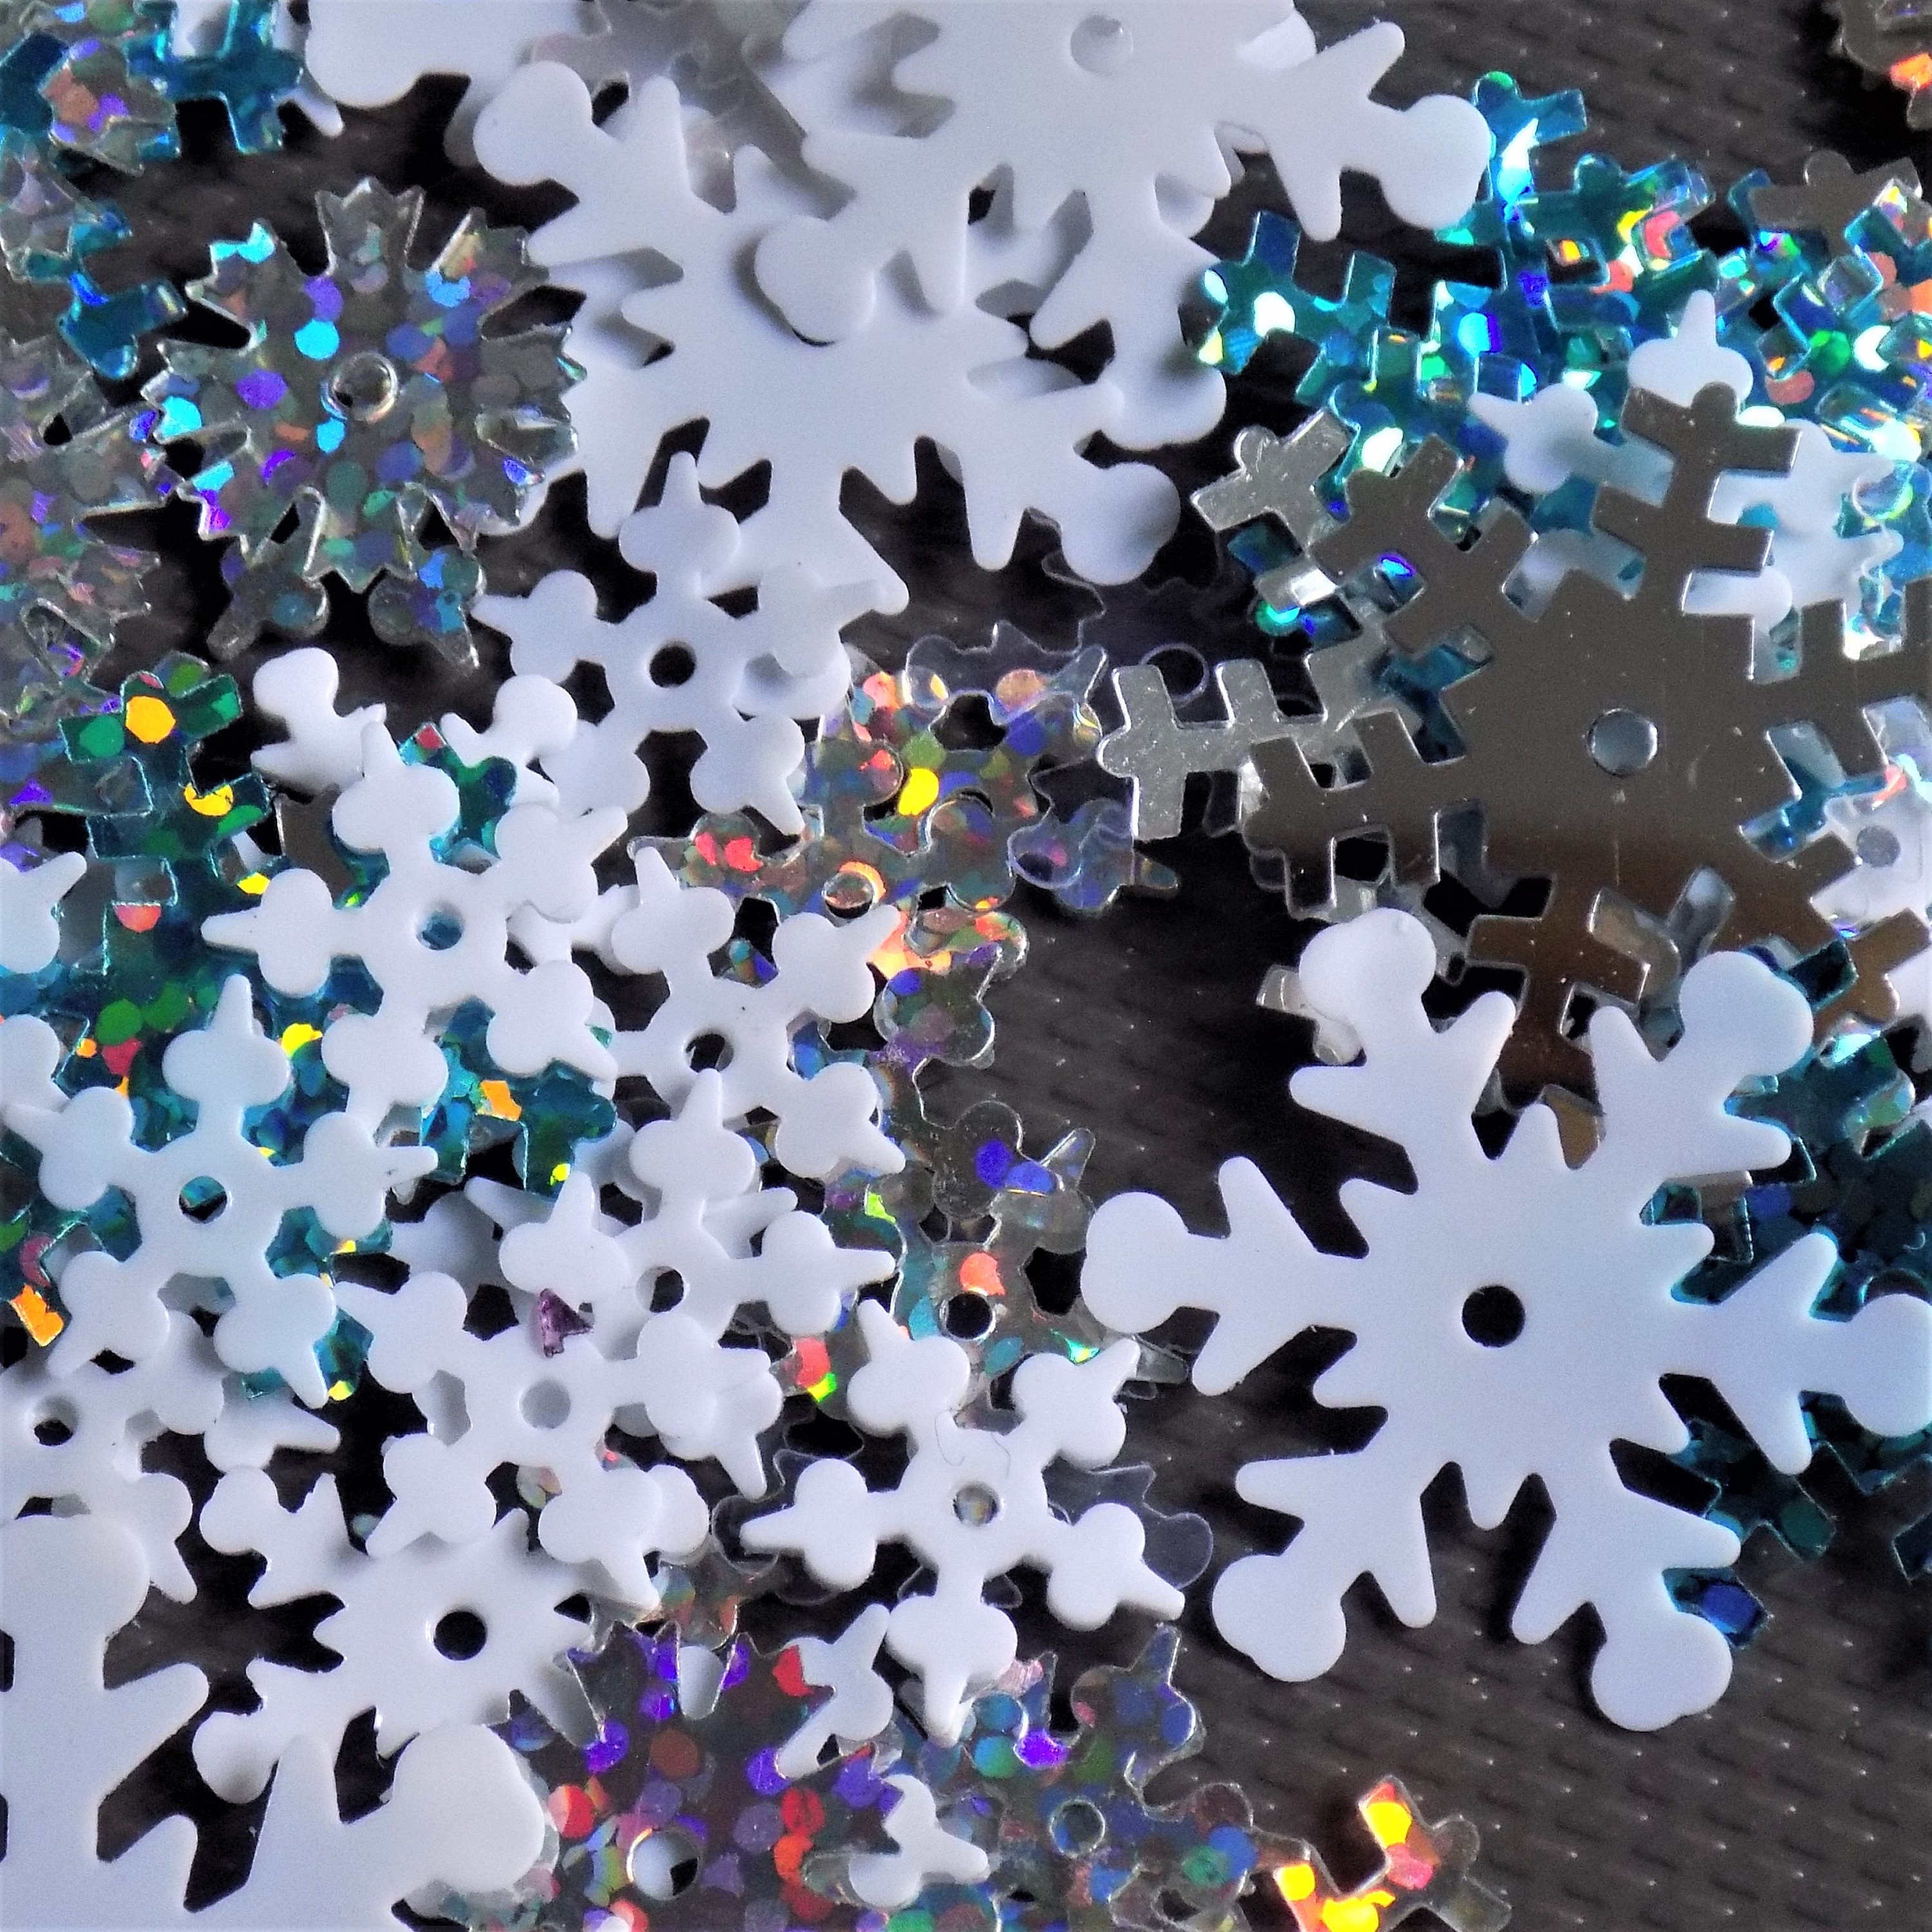 13mm Snowflake Sequins, Snowflake Sequins, Christmas Sequins